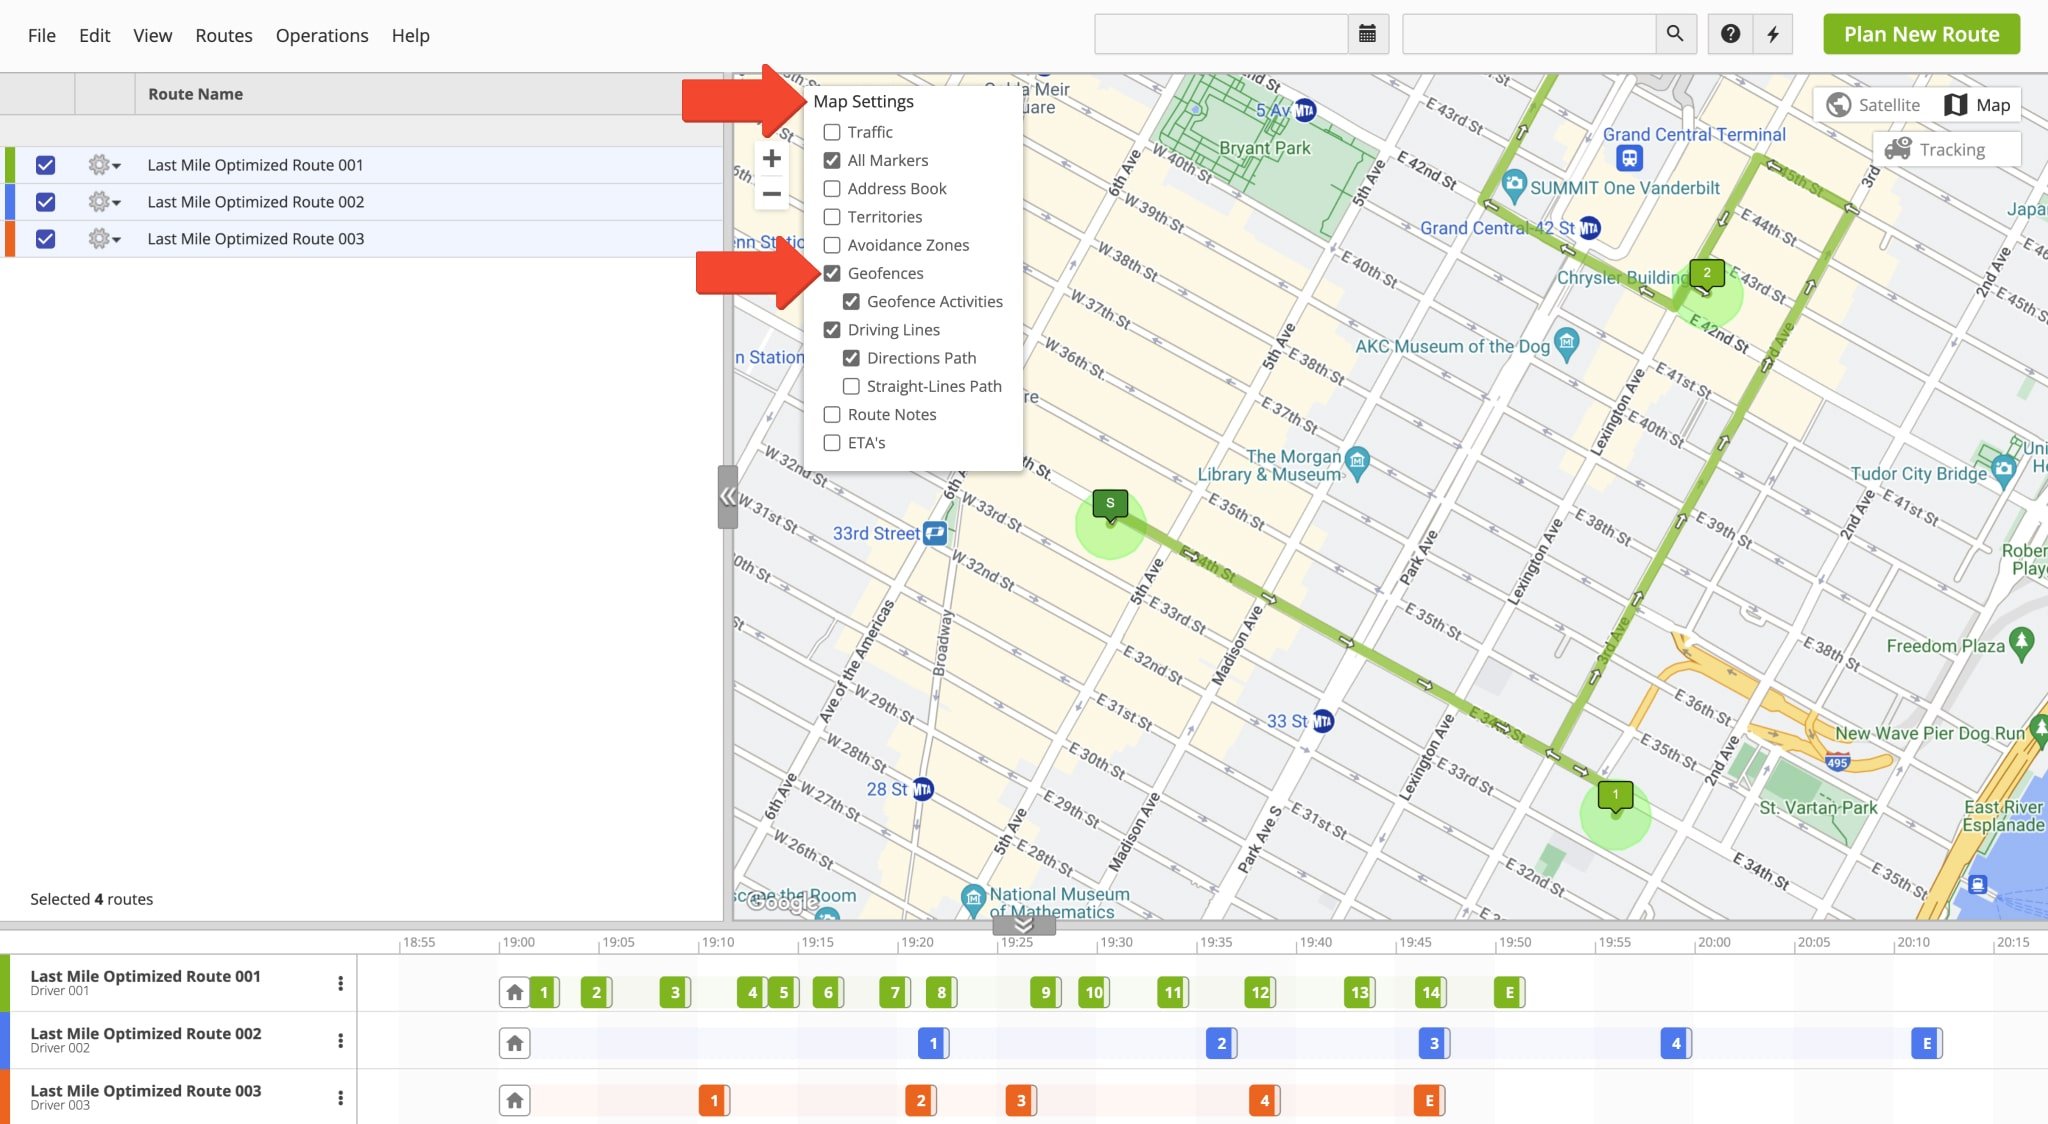 Enable Geofences and Geofence Activities on multiple Routes Map.